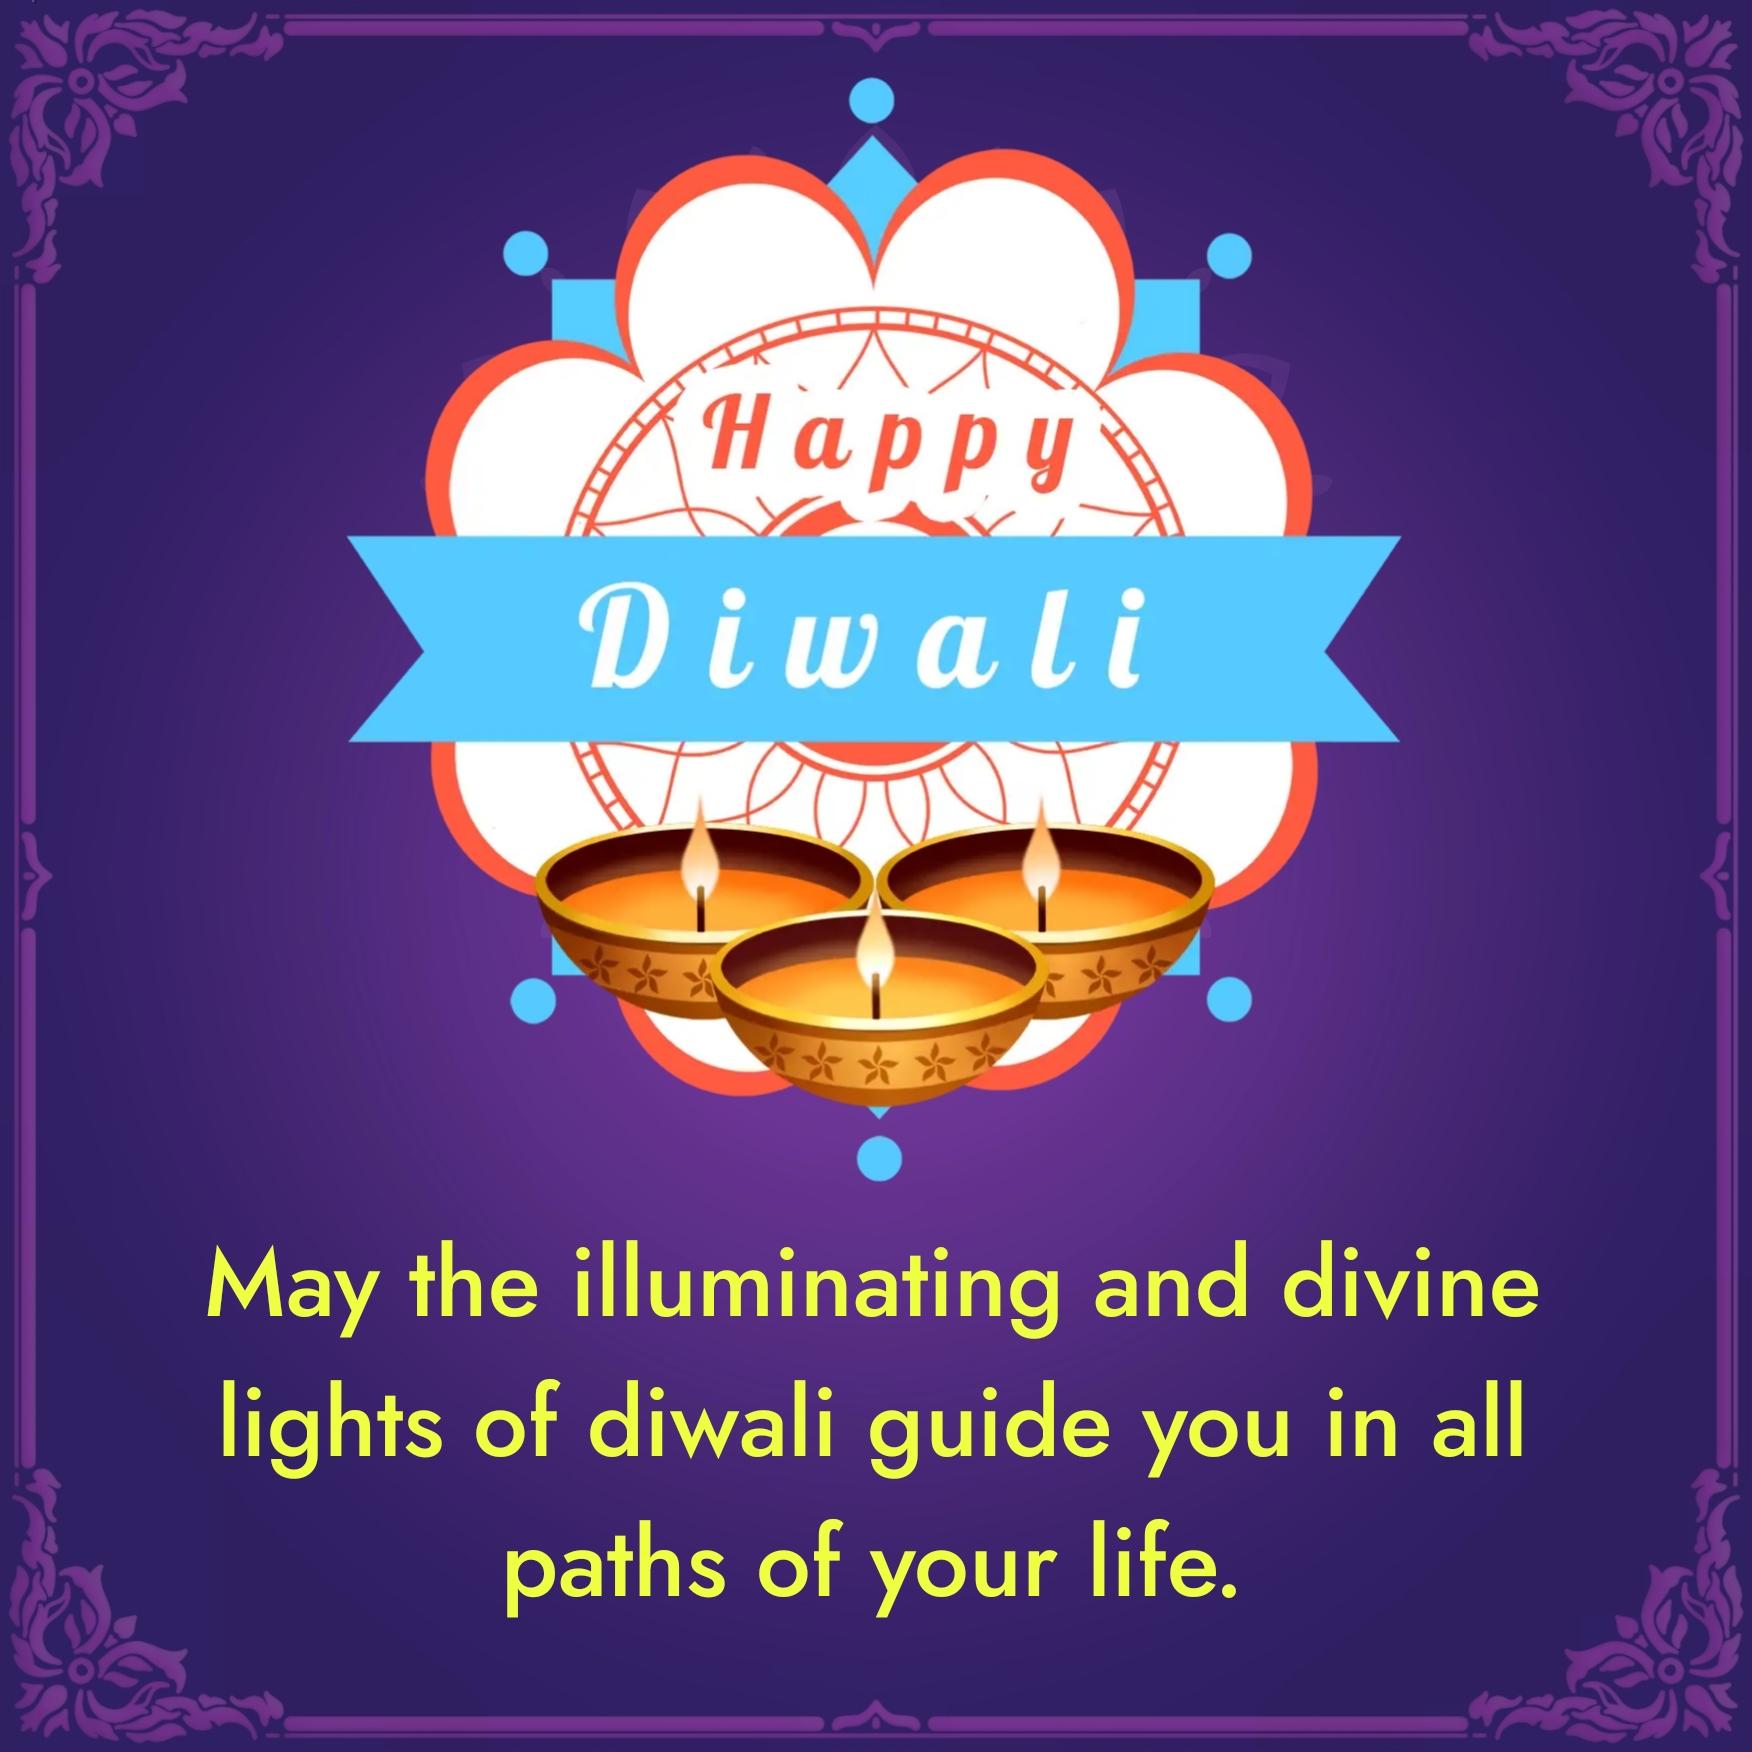 May the illuminating and divine lights of diwali guide you